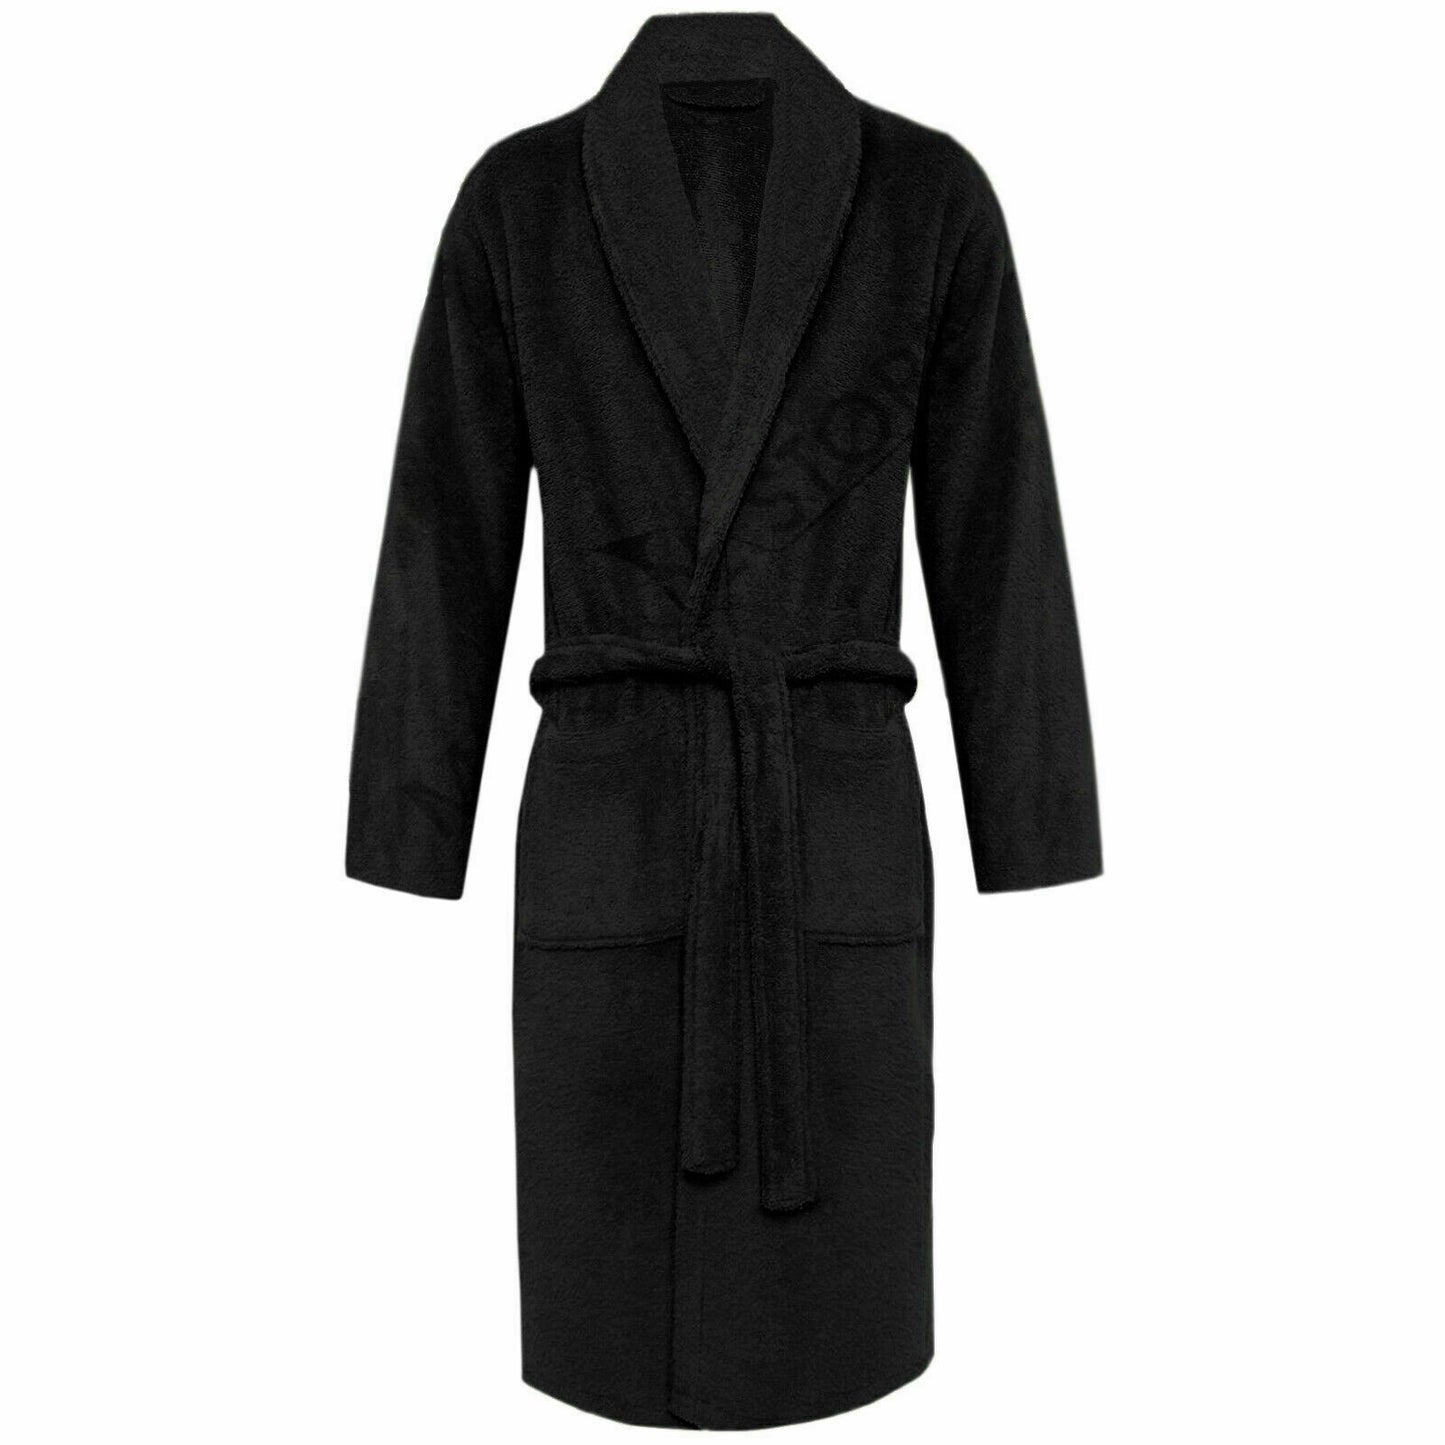 100% LUXURY EGYPTIAN COTTON TOWELLING BATH ROBE UNISEX DRESSING GOWN TERRY TOWEL